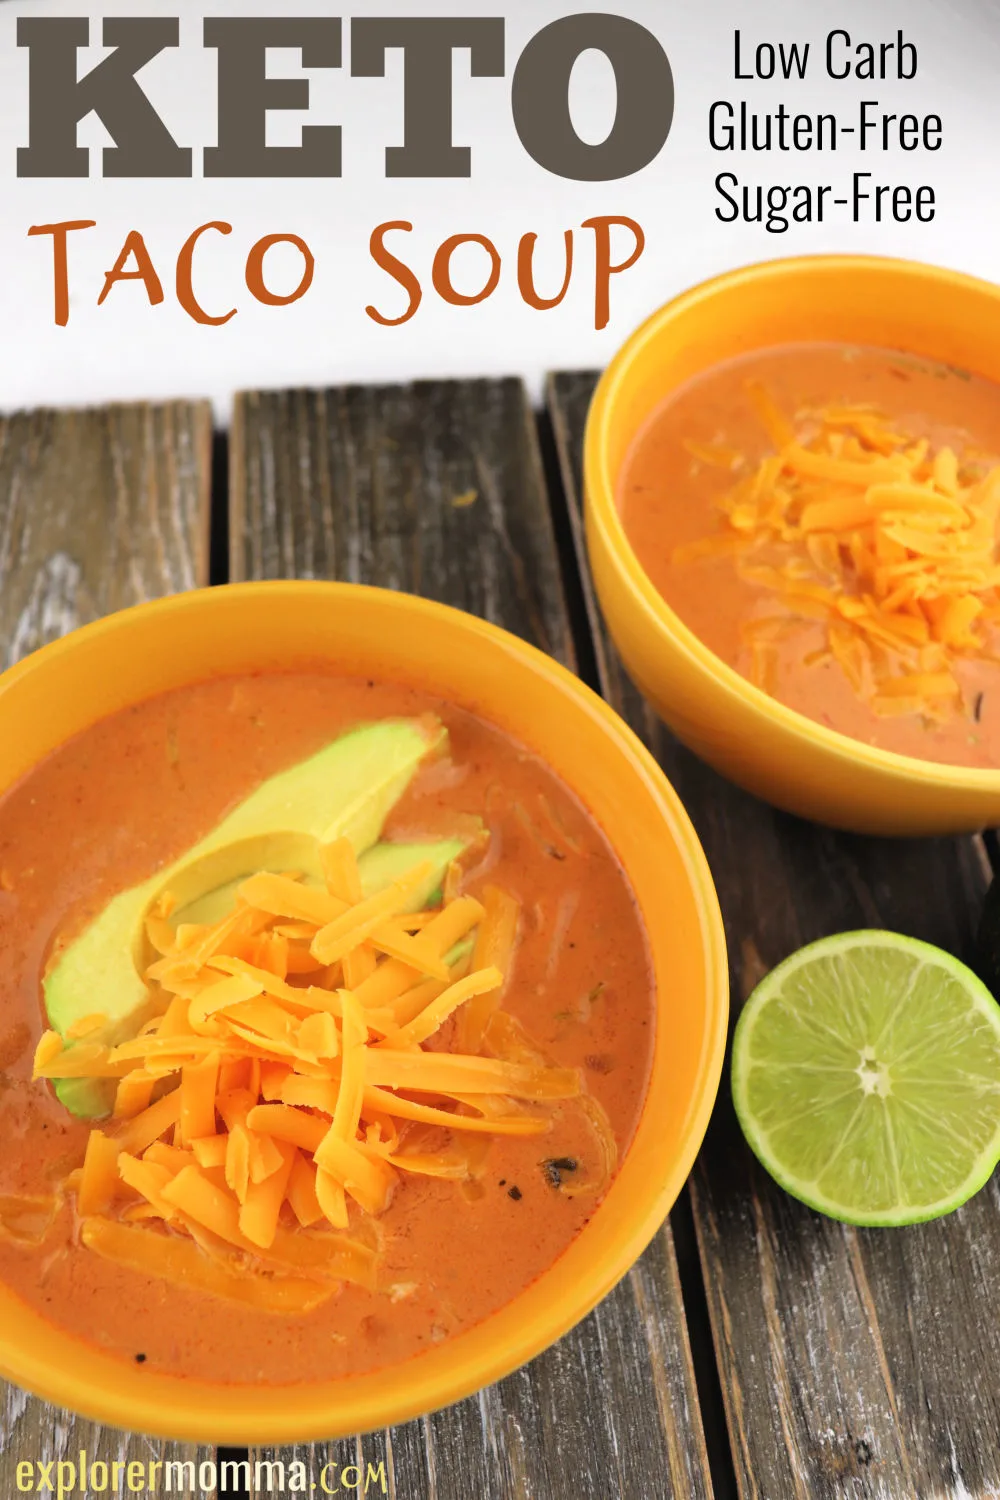 Keto taco soup. An easy and delicious low carb, gluten-free recipe, perfect for family weeknights. #lowcarbdinner #ketosoups